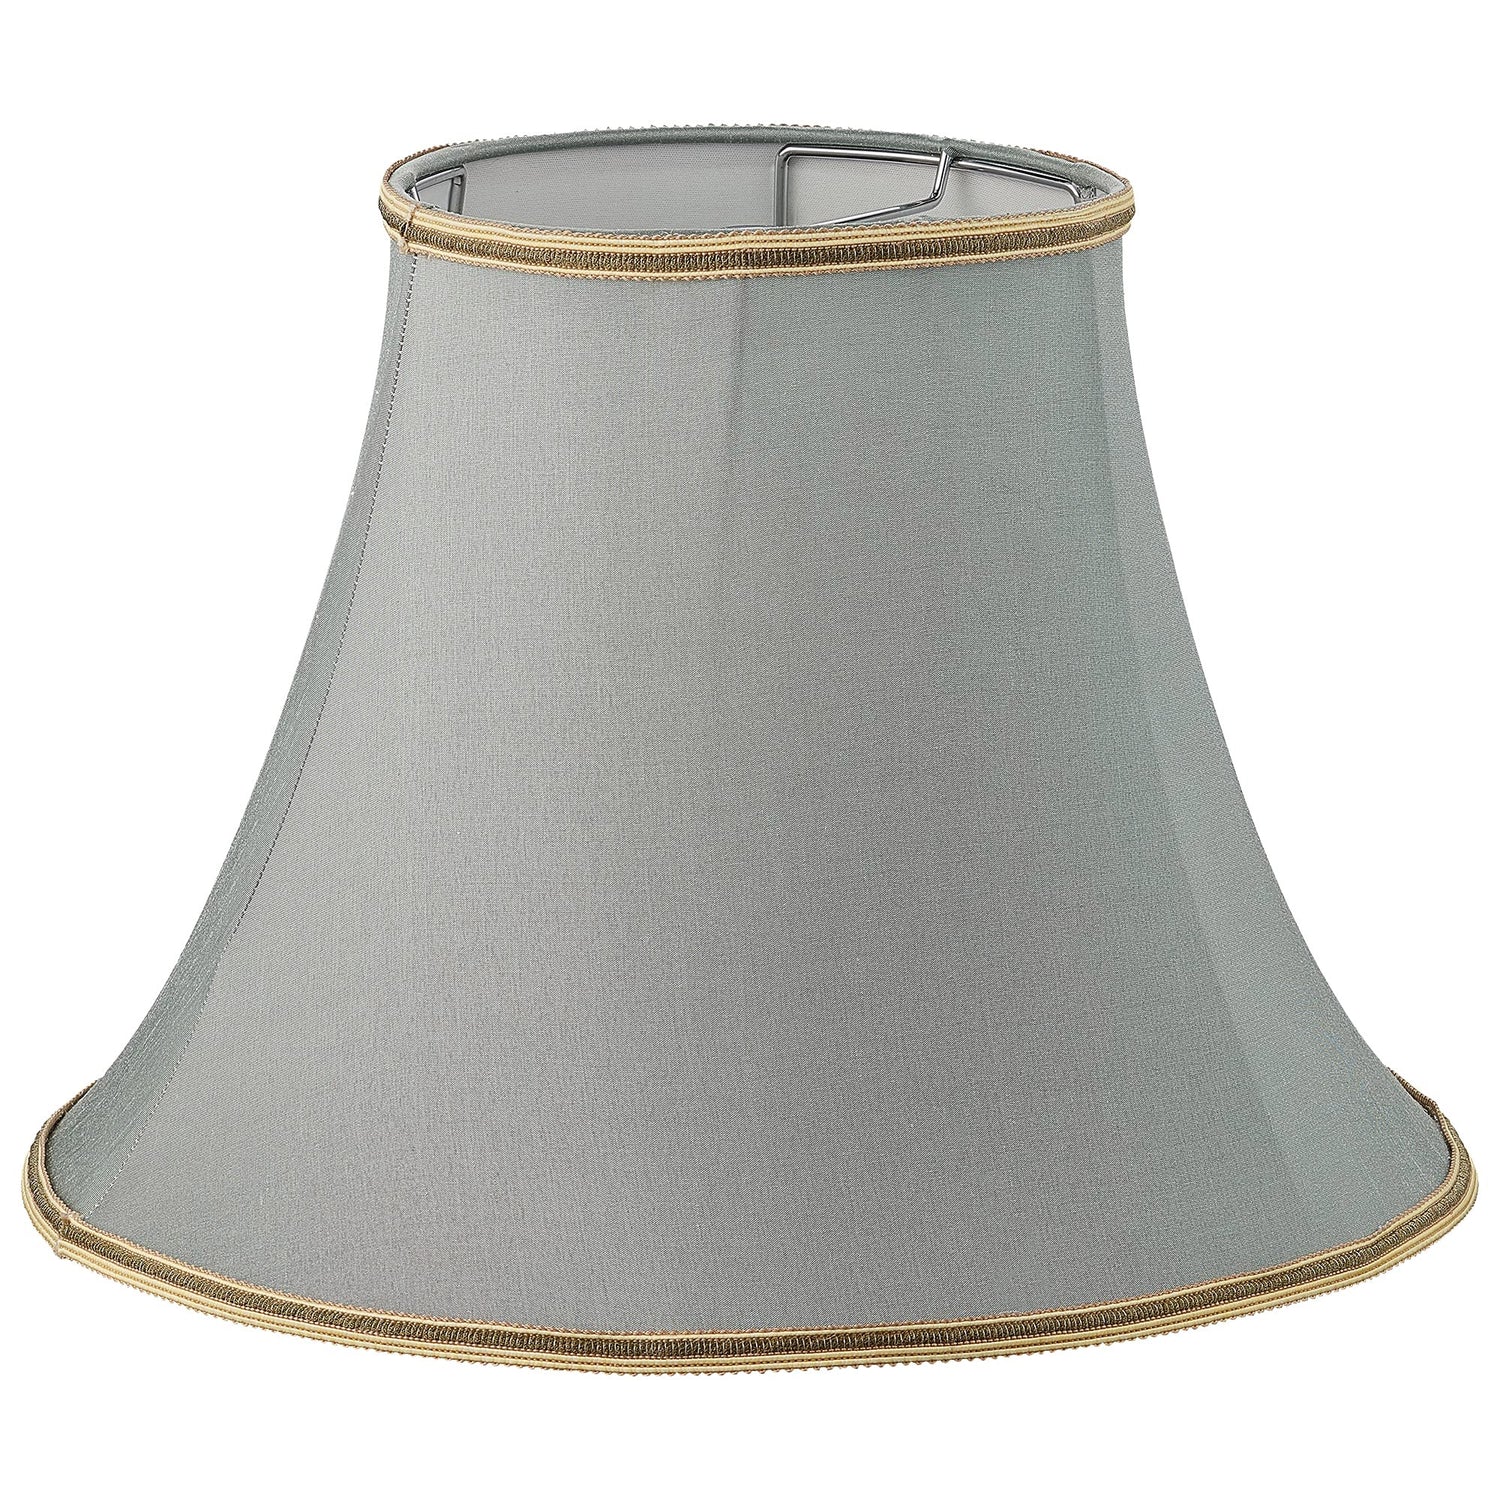 Refresh the look of your favorite lamp! Carro Home lamp shades bring a new and sophisticated look to your table or floor lamps. This replacement spider/harp lamp shade has an unique collapsible construction, easy to store and easy to assemble. Carro Home lampshades are made of high quality fabric and materials, and will add a stylish design flair to your home. 